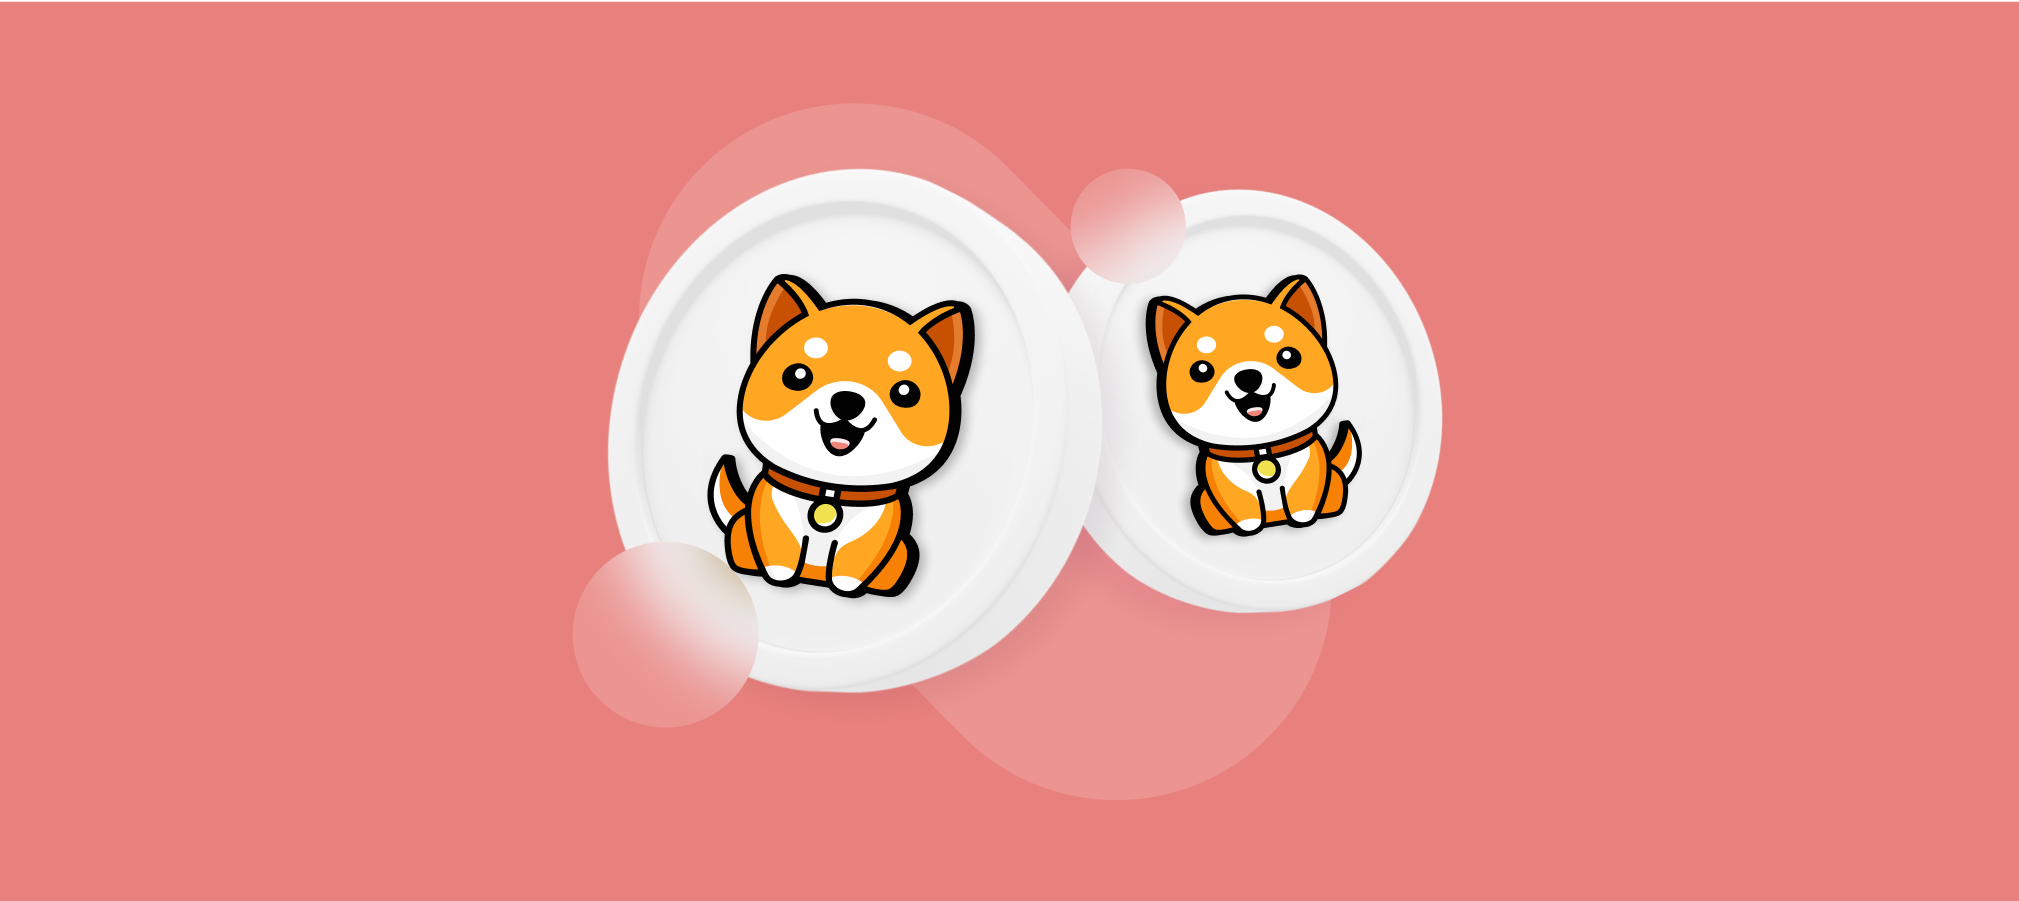 What Is Baby Doge Coin?